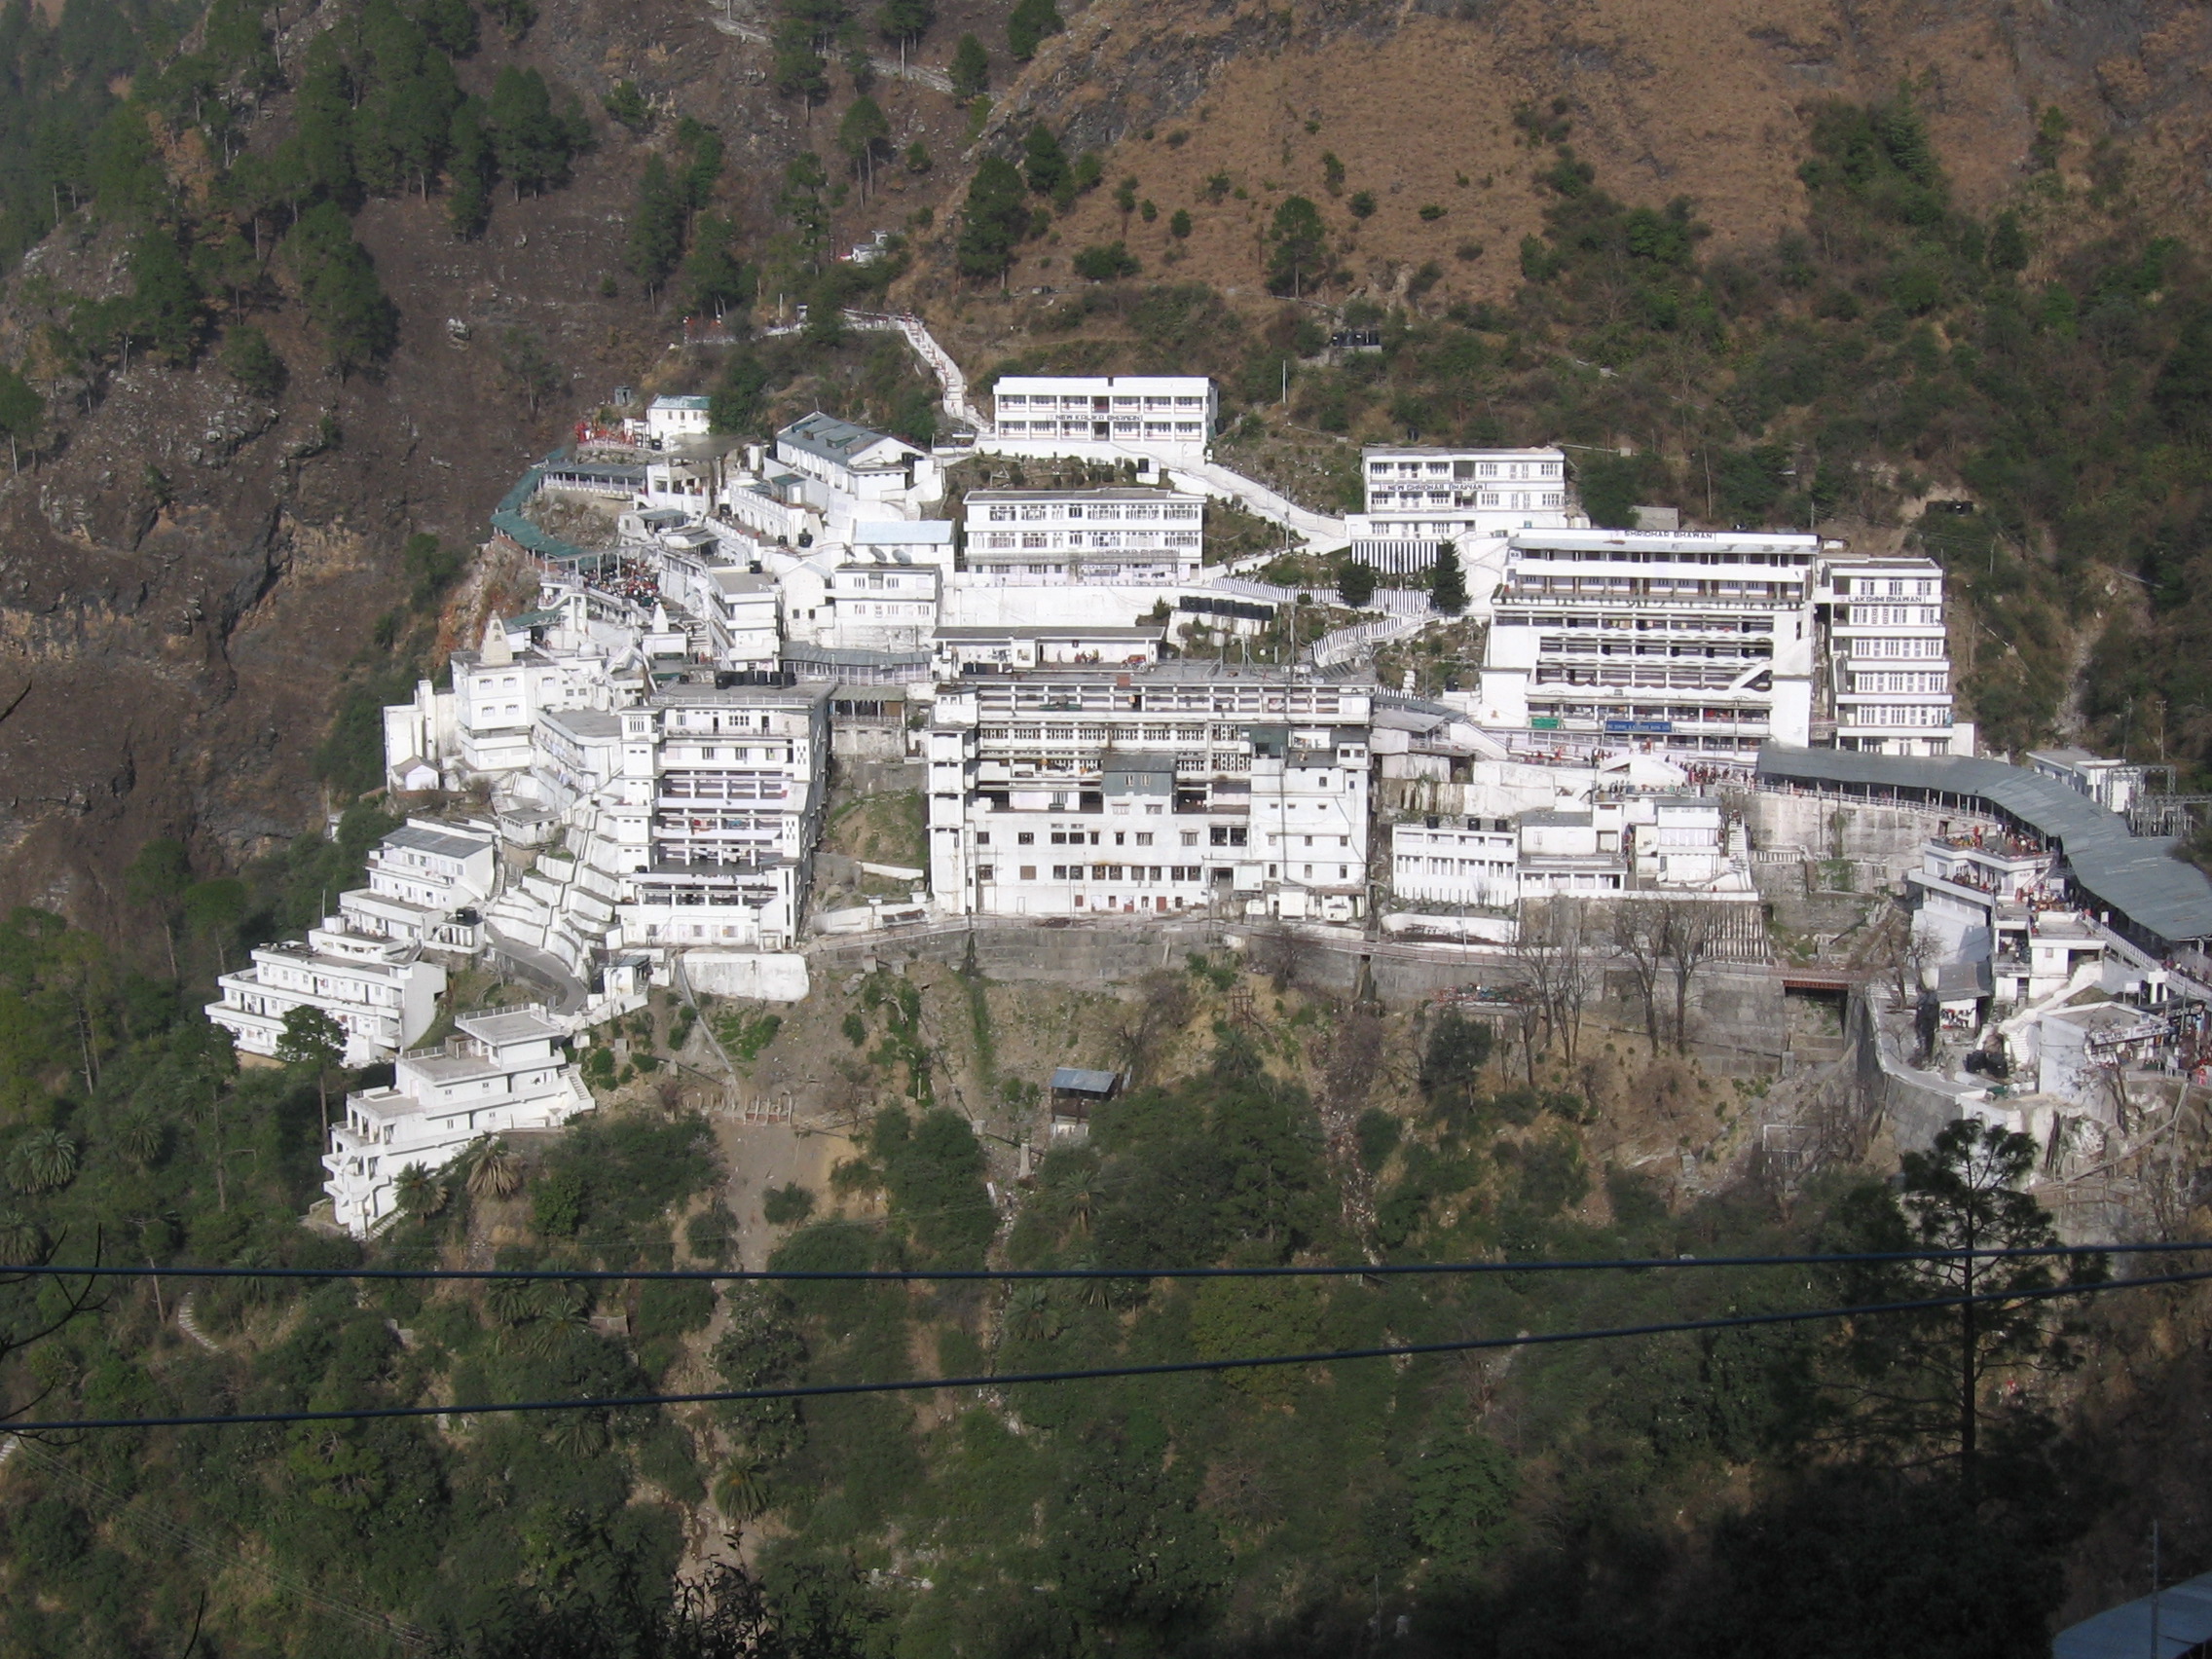 Mata vaishno devi darshan registration and helicopter service to commence from Aug 26 